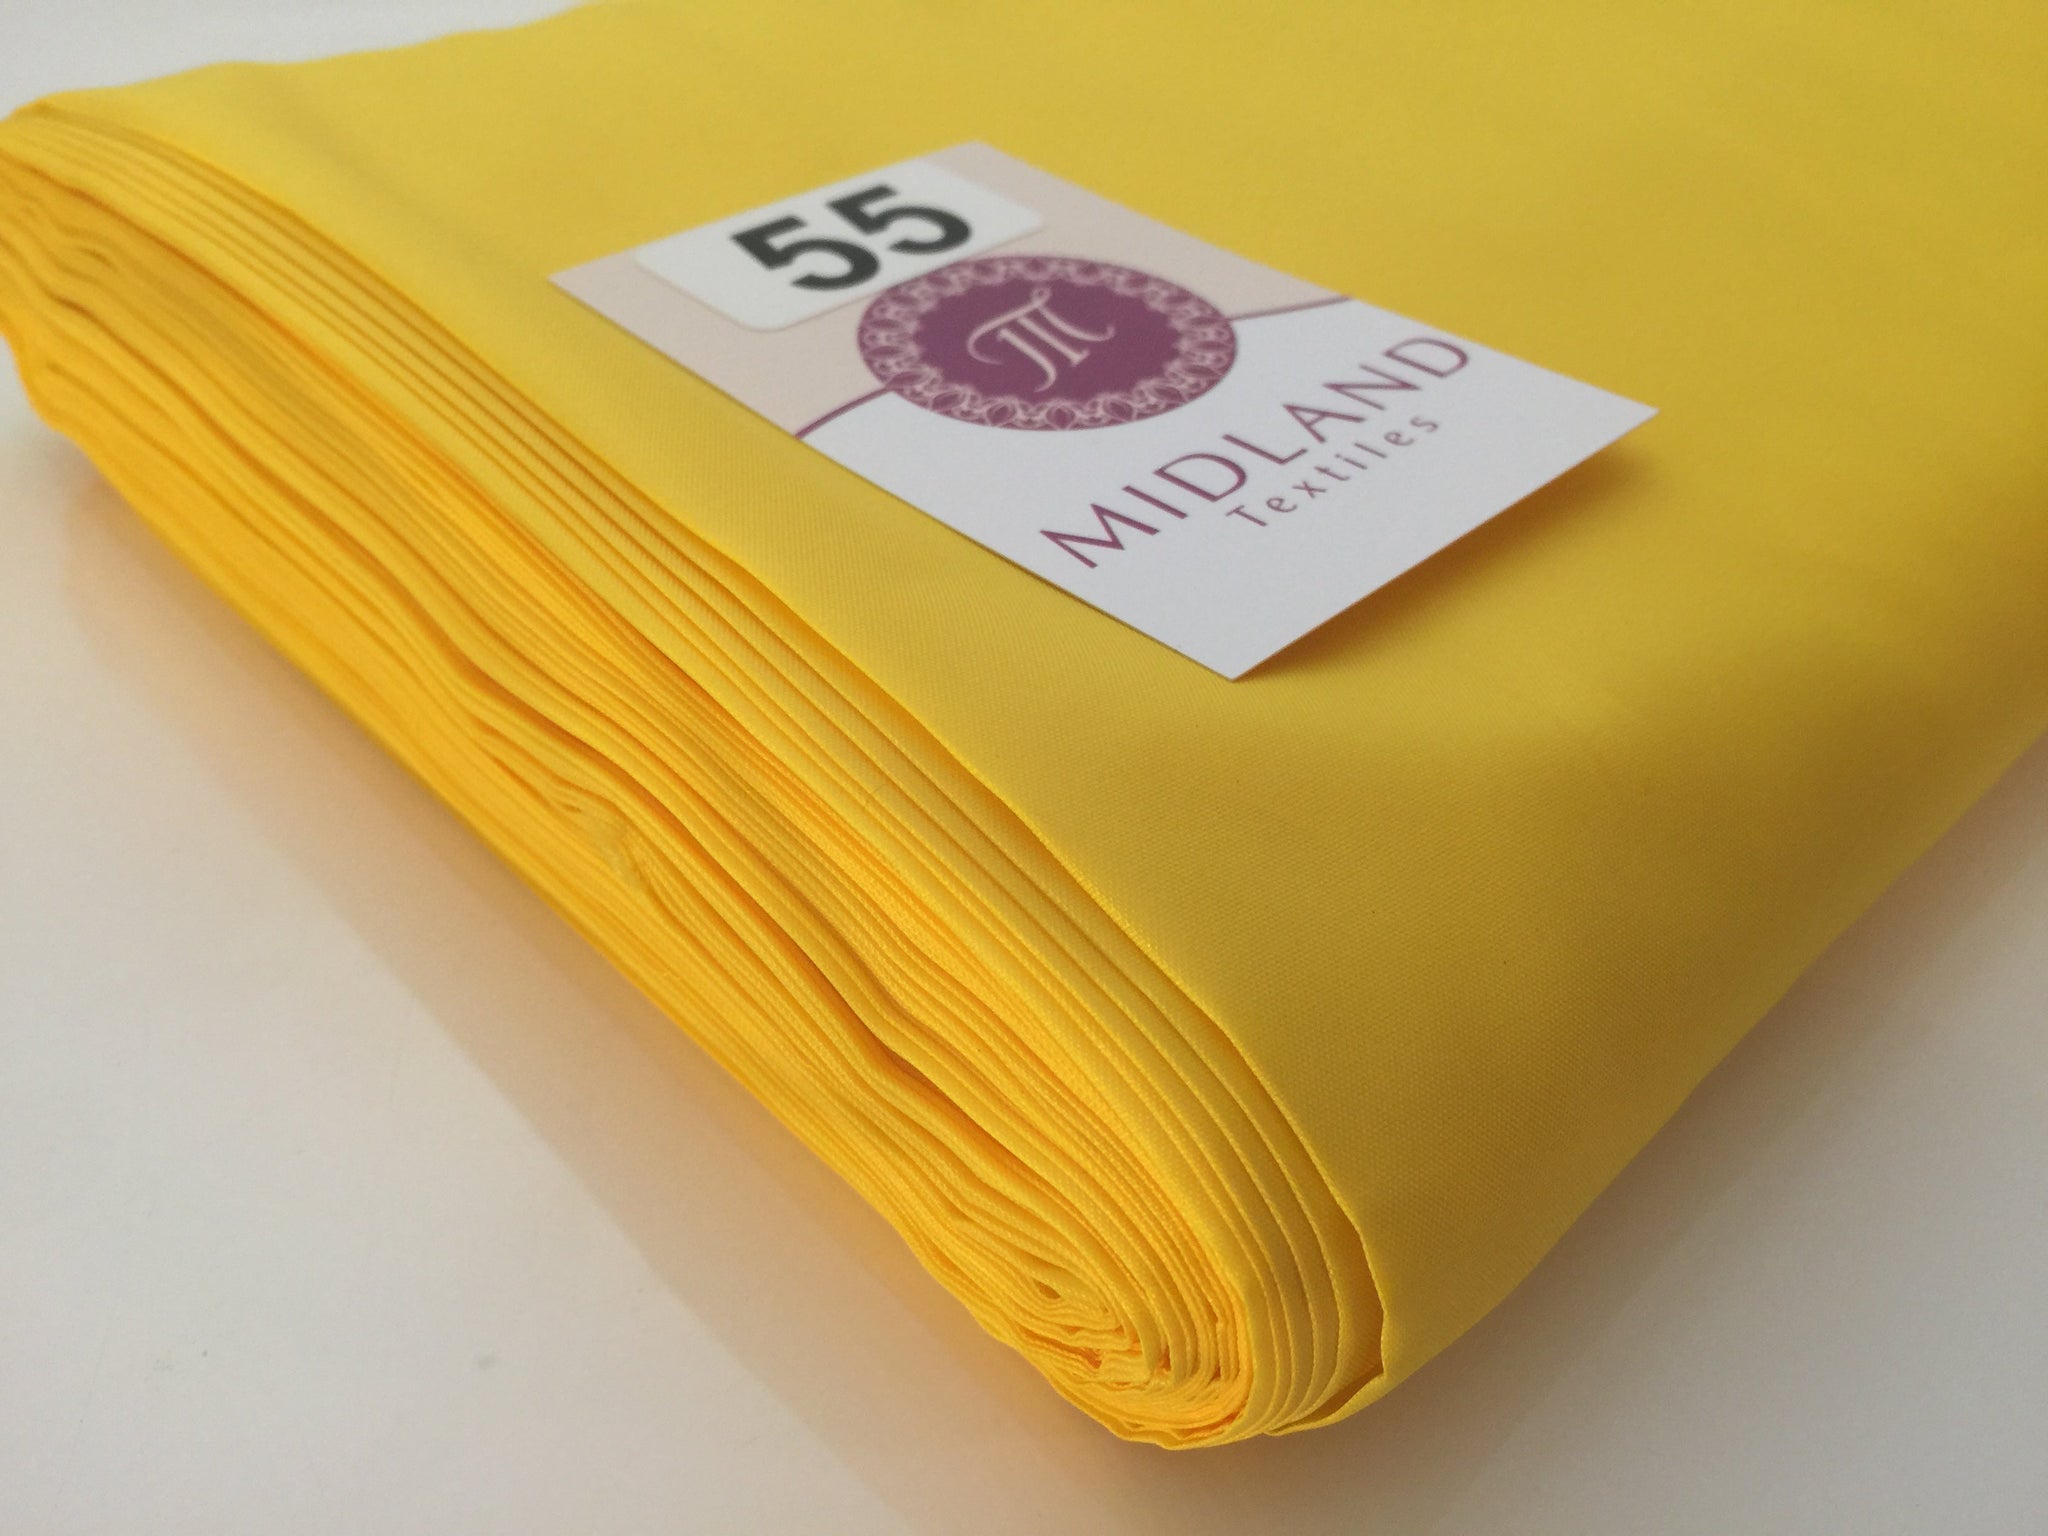 SAMPLES ONLY HIGH QUALITY ANTI STATIC DRESS LINING FABRIC 100% POLYESTER M450  MTEX